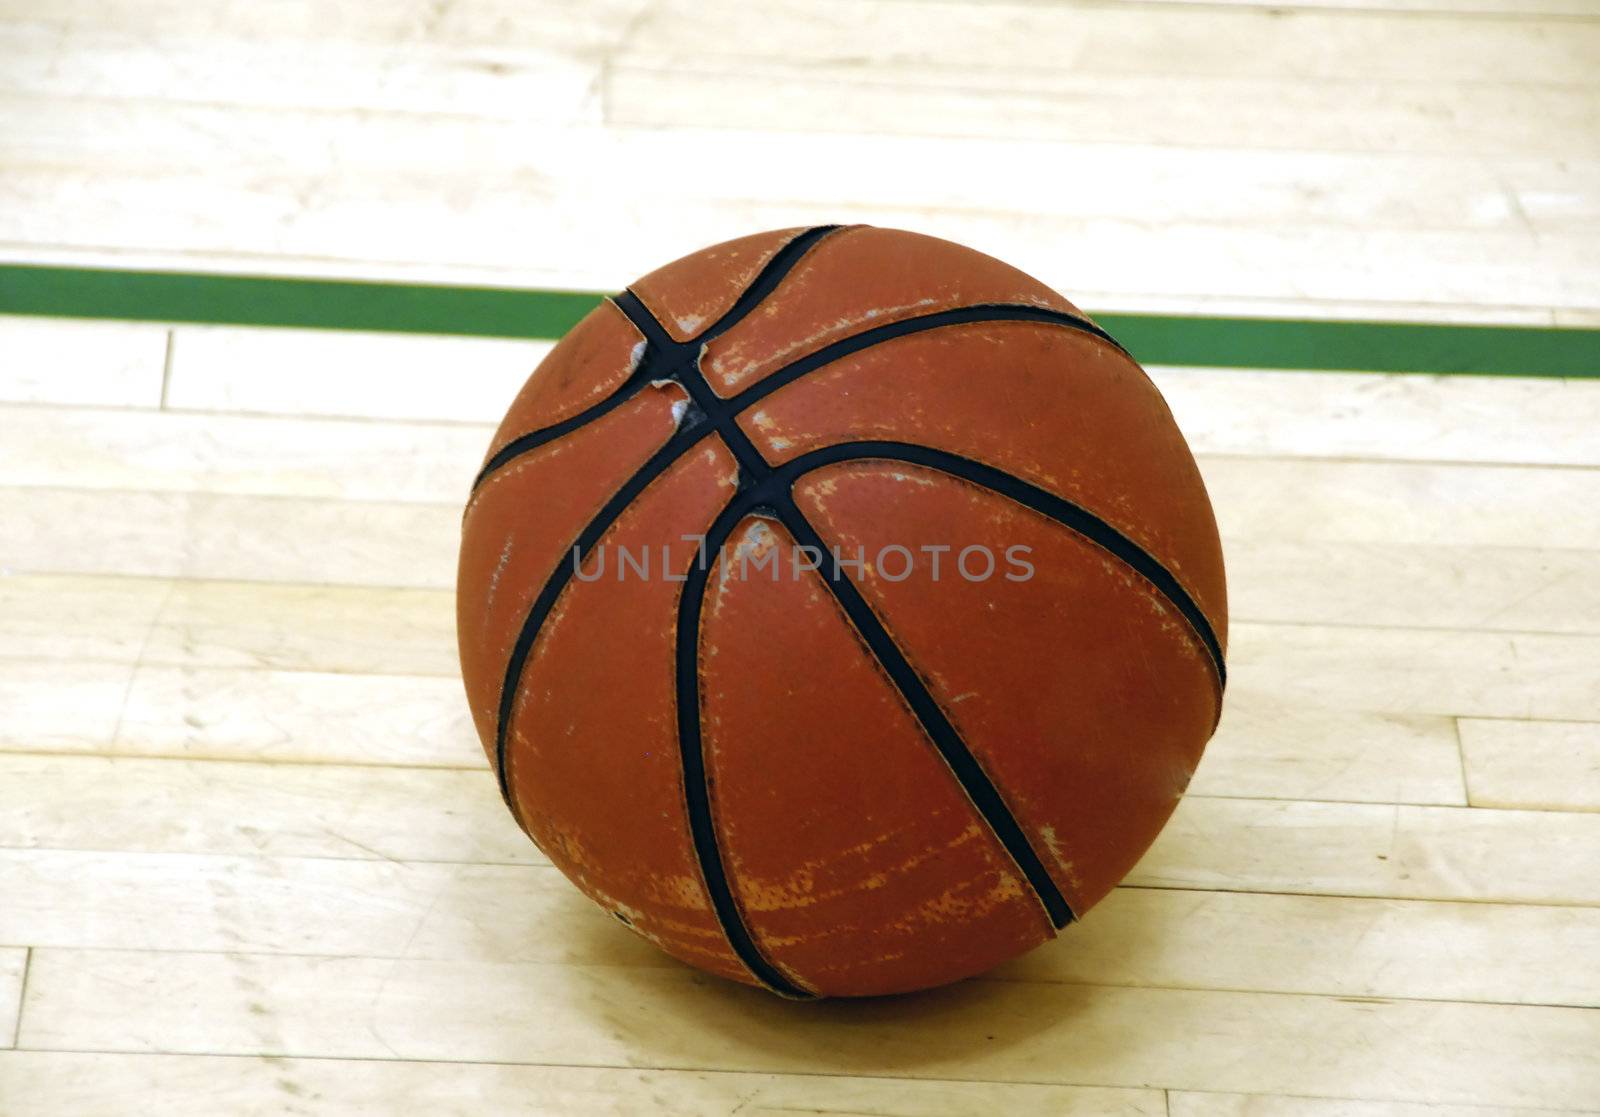 An old basketball on  an indoor wooden court